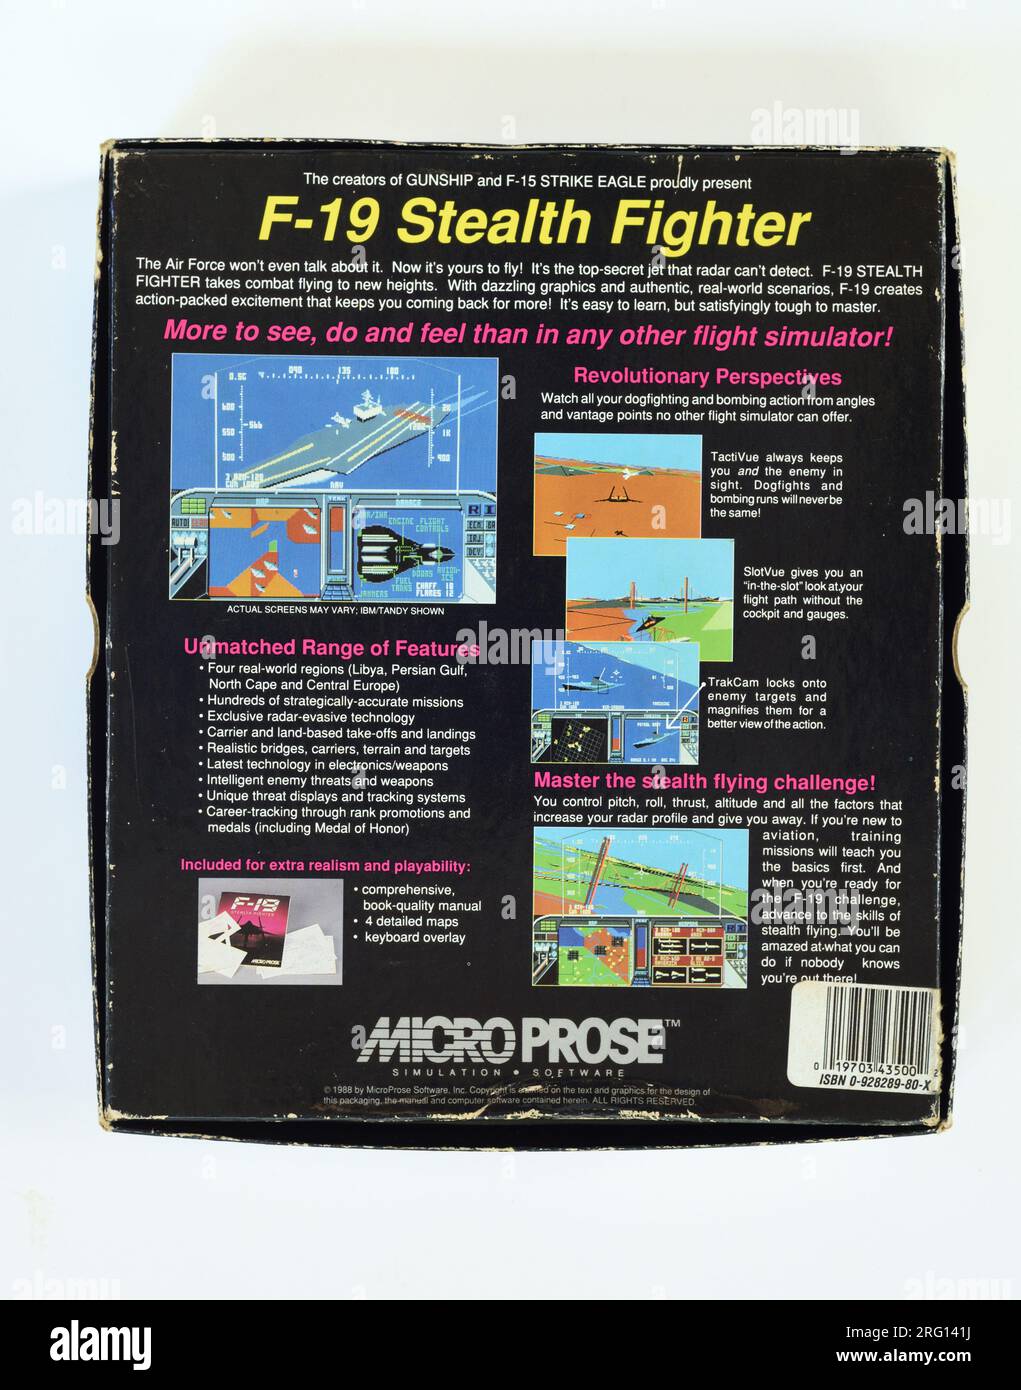 F-19 Stealth Fighter - combat flight simulator; 1988 MS-DOS computer game cover art and packaging design. Stock Photo